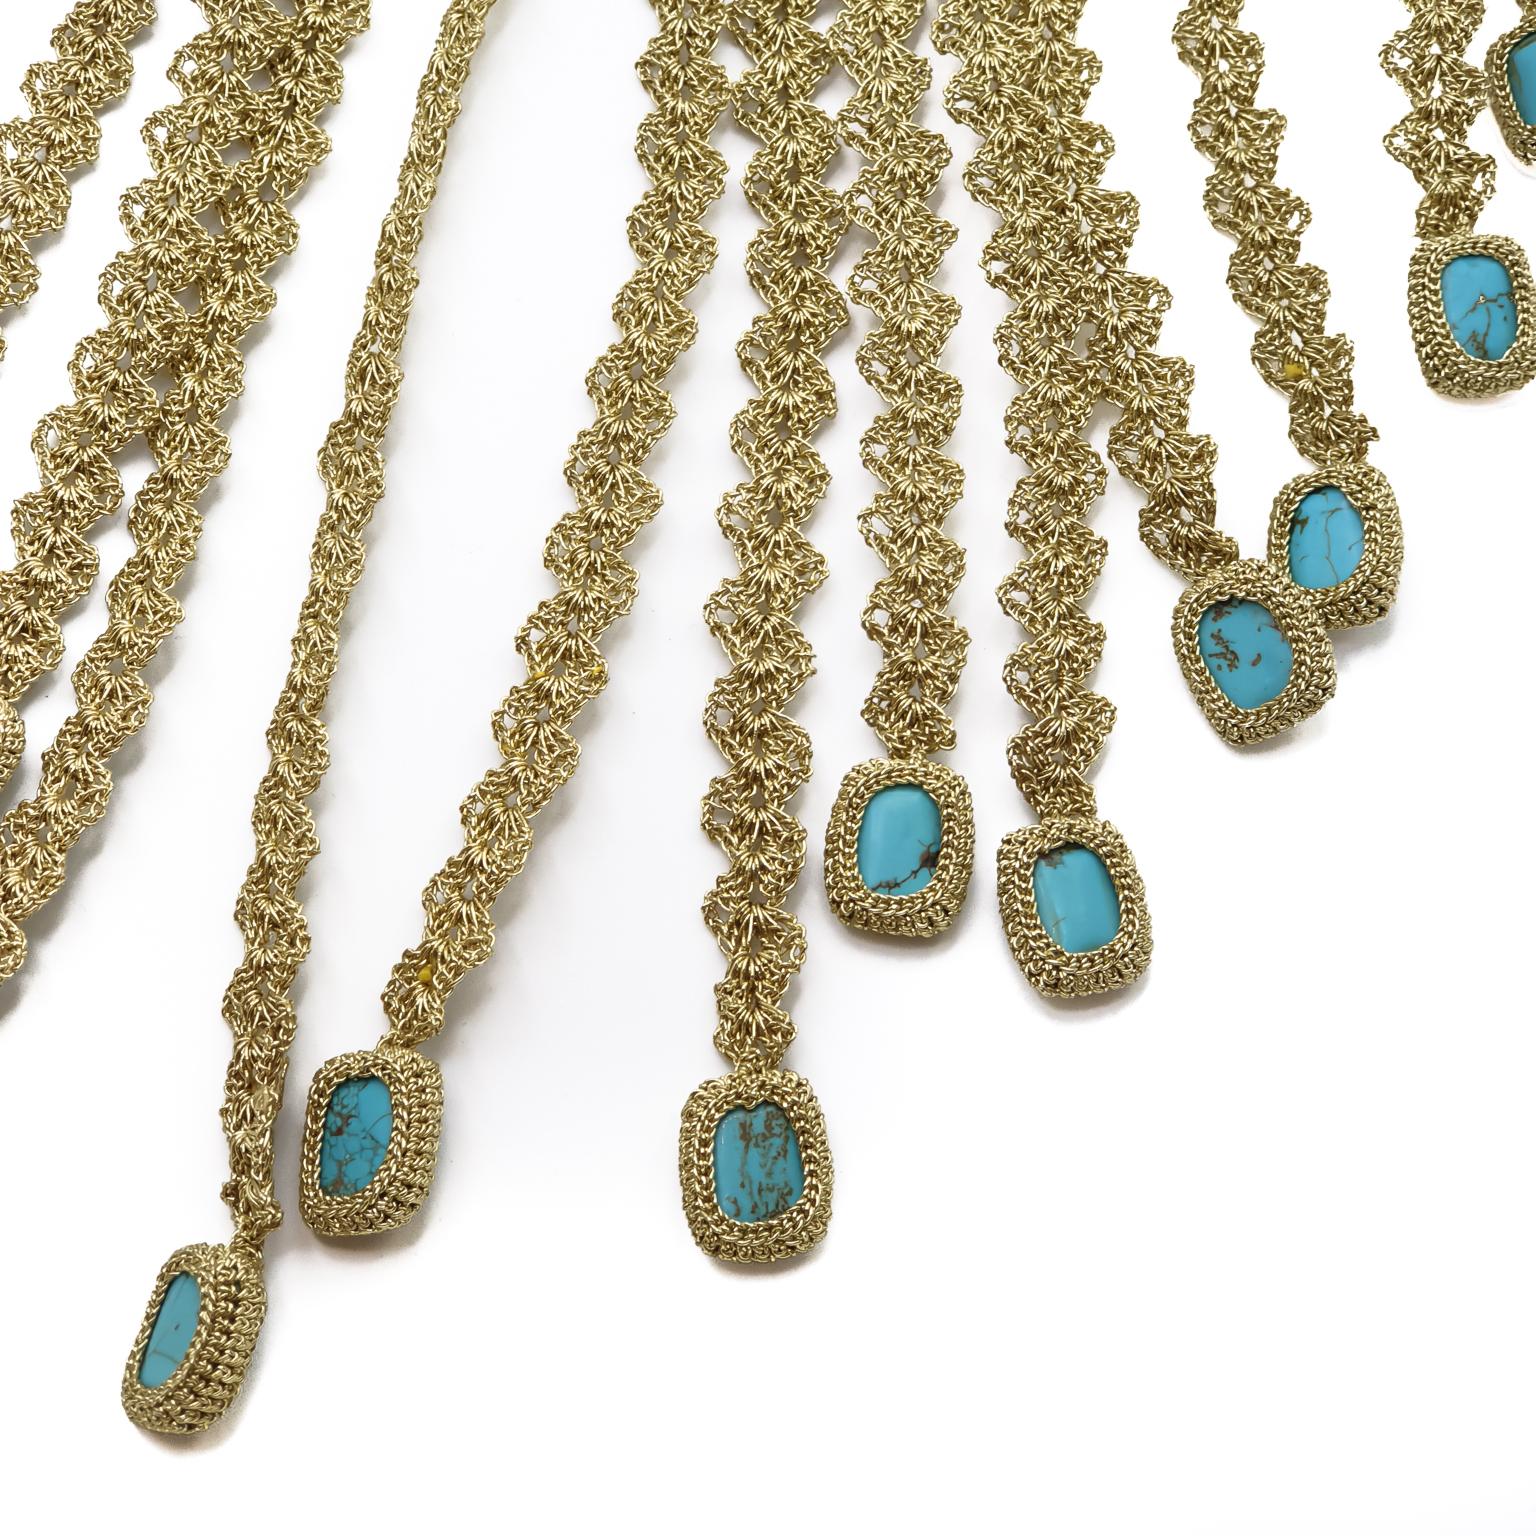 This is a one of a kind contemporary crochet necklace. It is a statement piece. The stones are 16x12mm Turquoise. It is hip and fresh and very unique.

The necklace is crochet with a smooth passing thread. It is a cotton thread coated with a gold